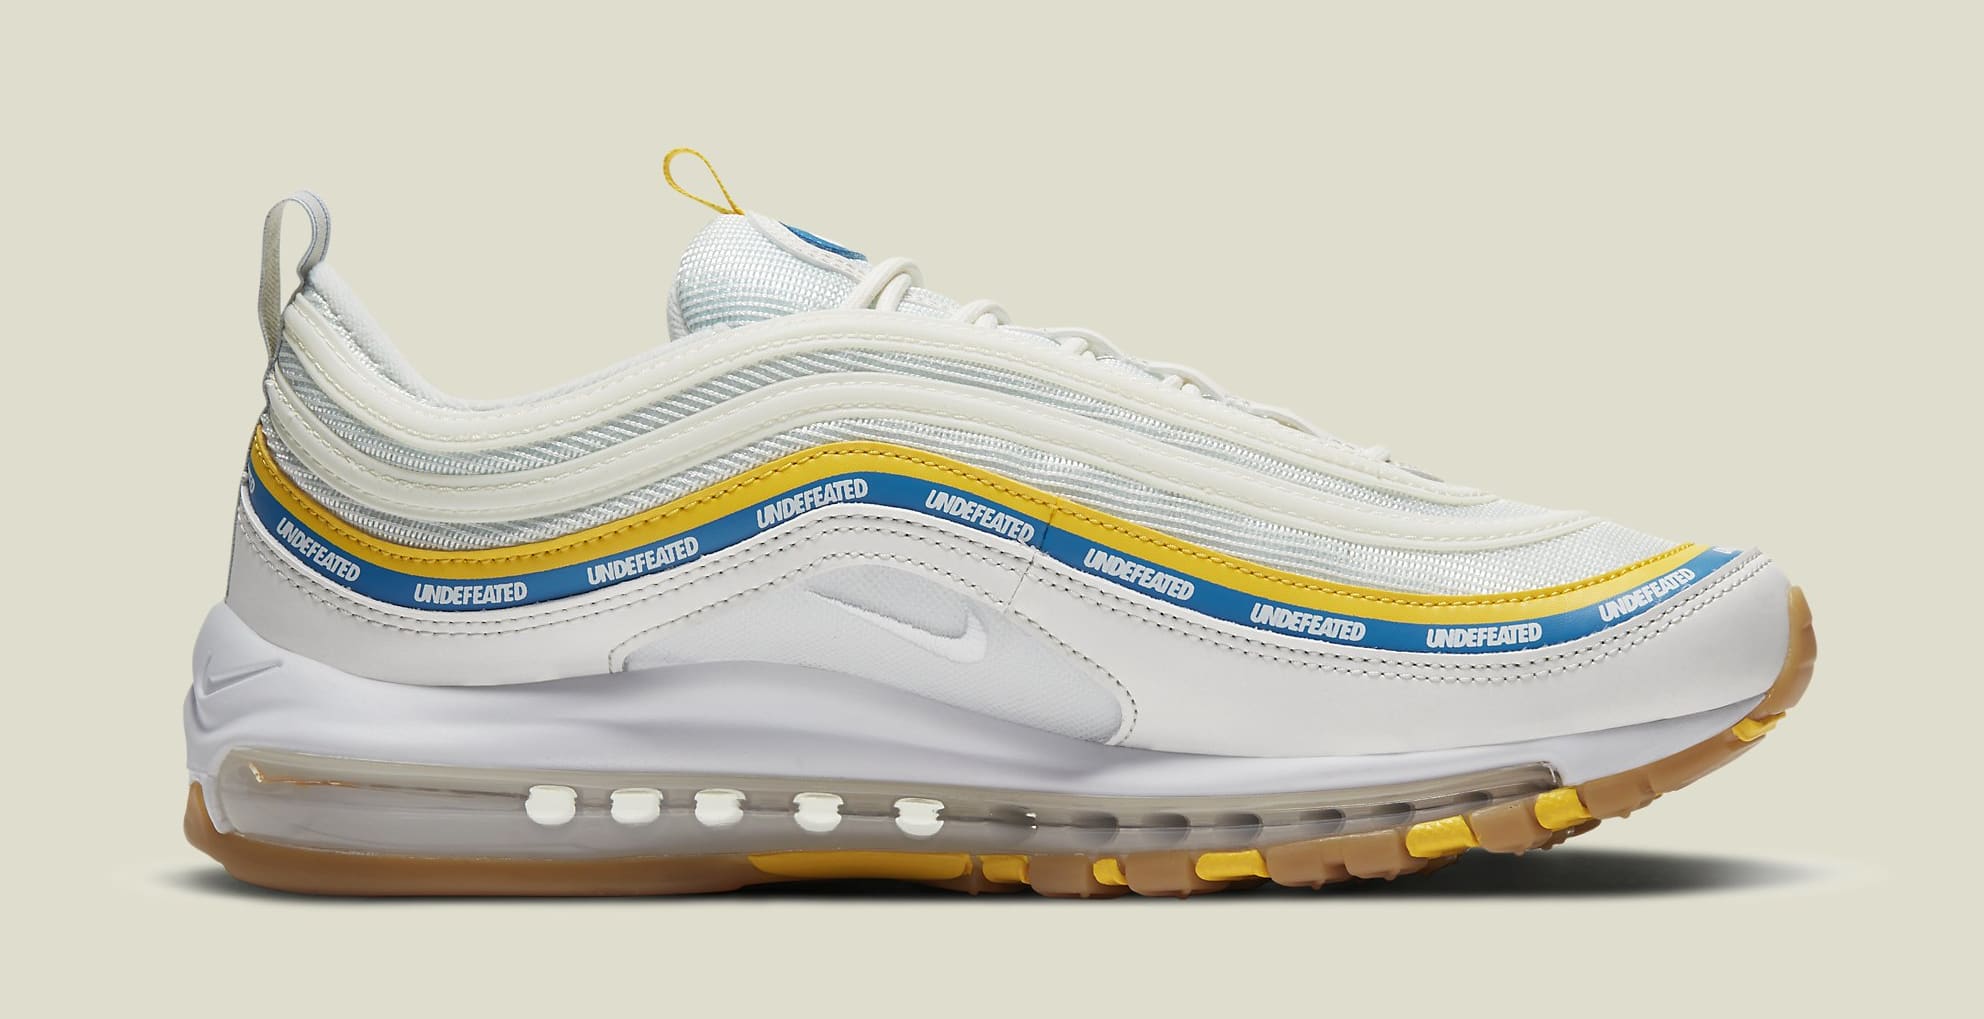 proteína reserva depositar A Third Undefeated x Nike Air Max 97 Surfaces | Complex